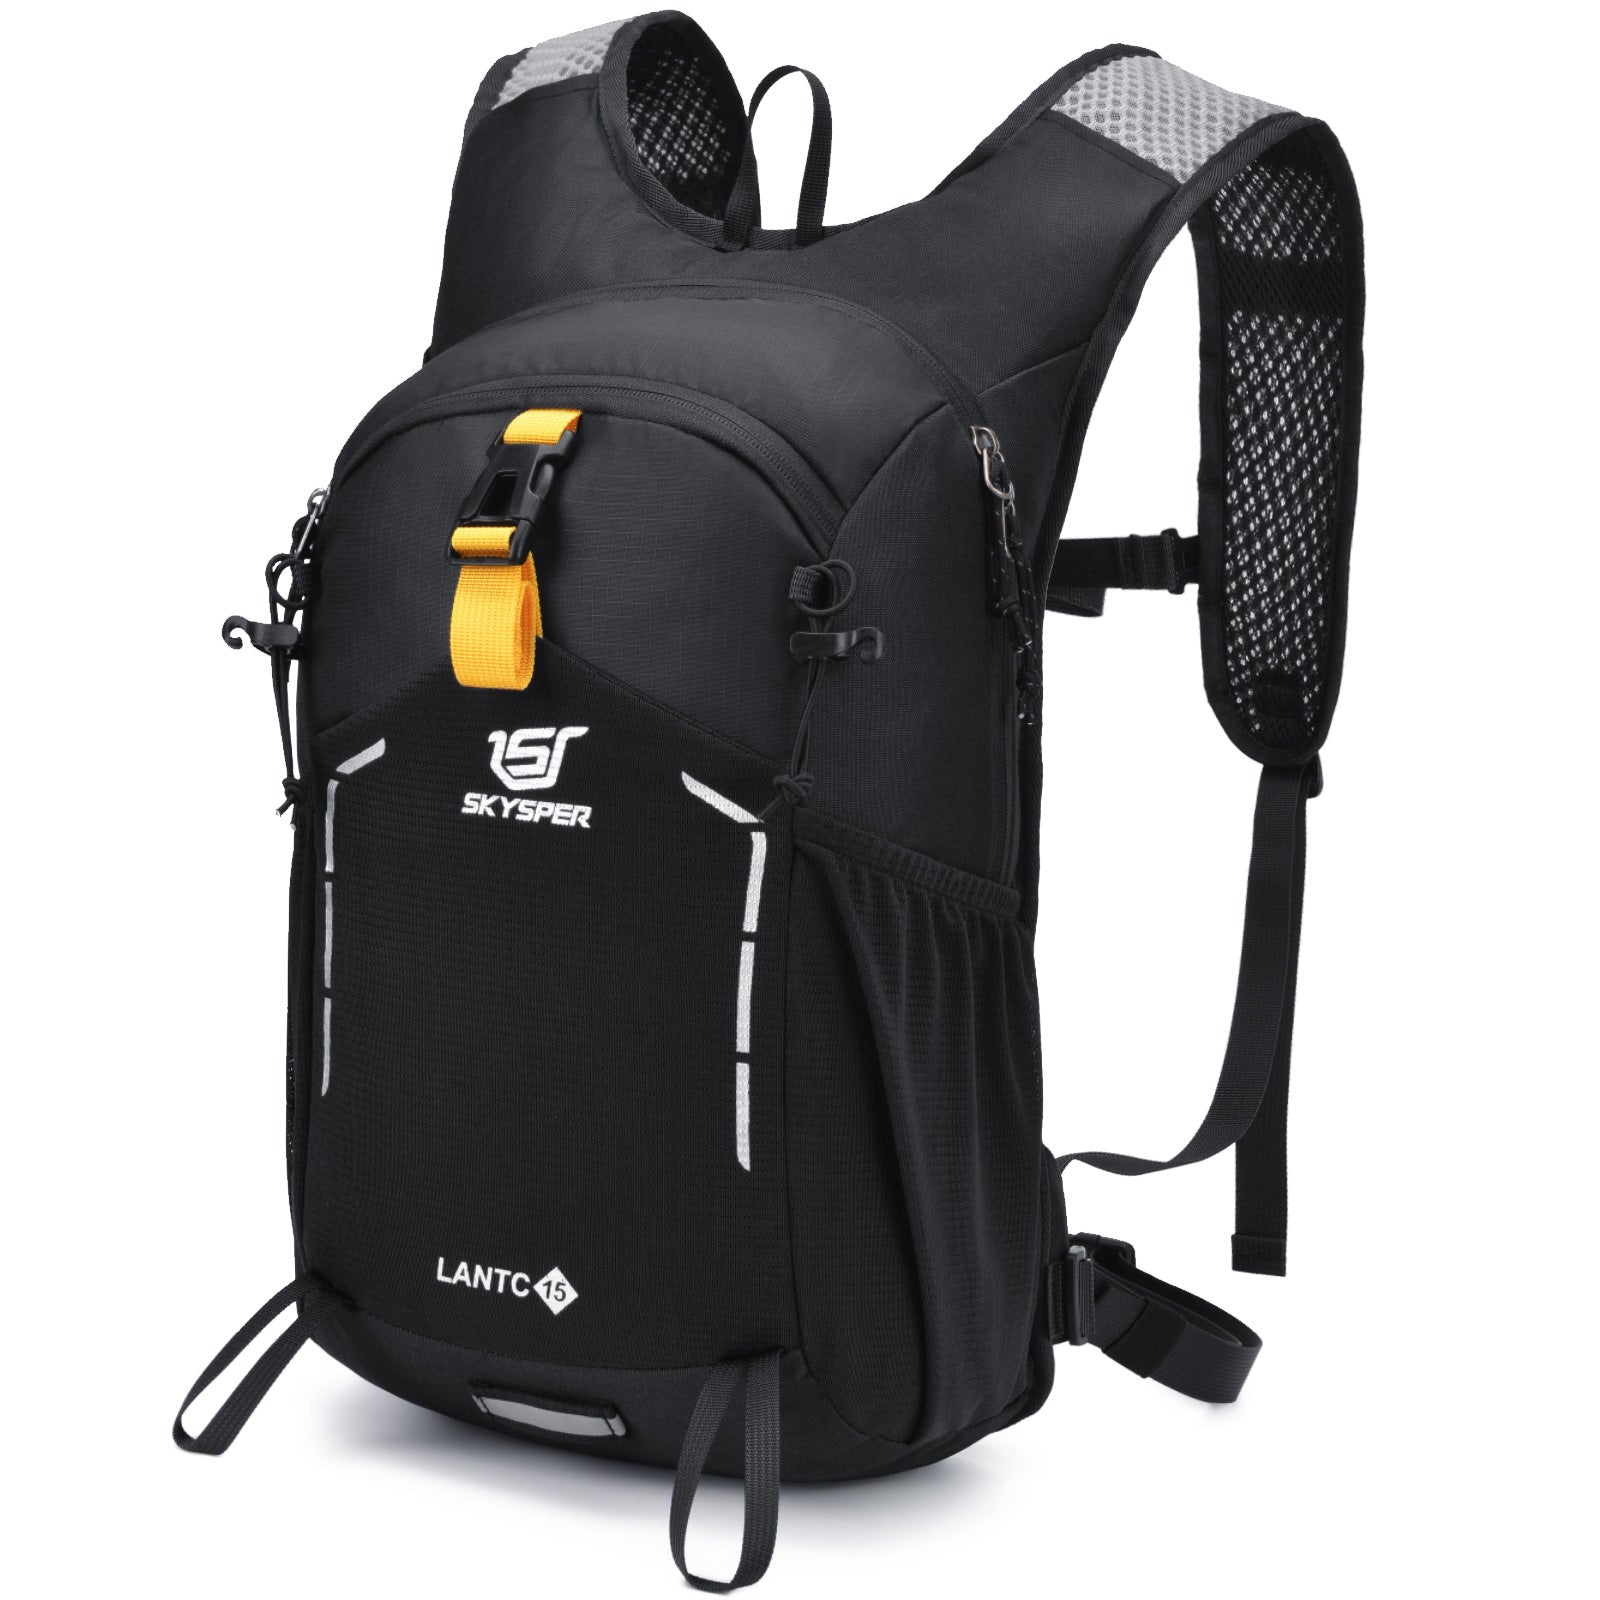 LANTC15, 15L Small Backpack